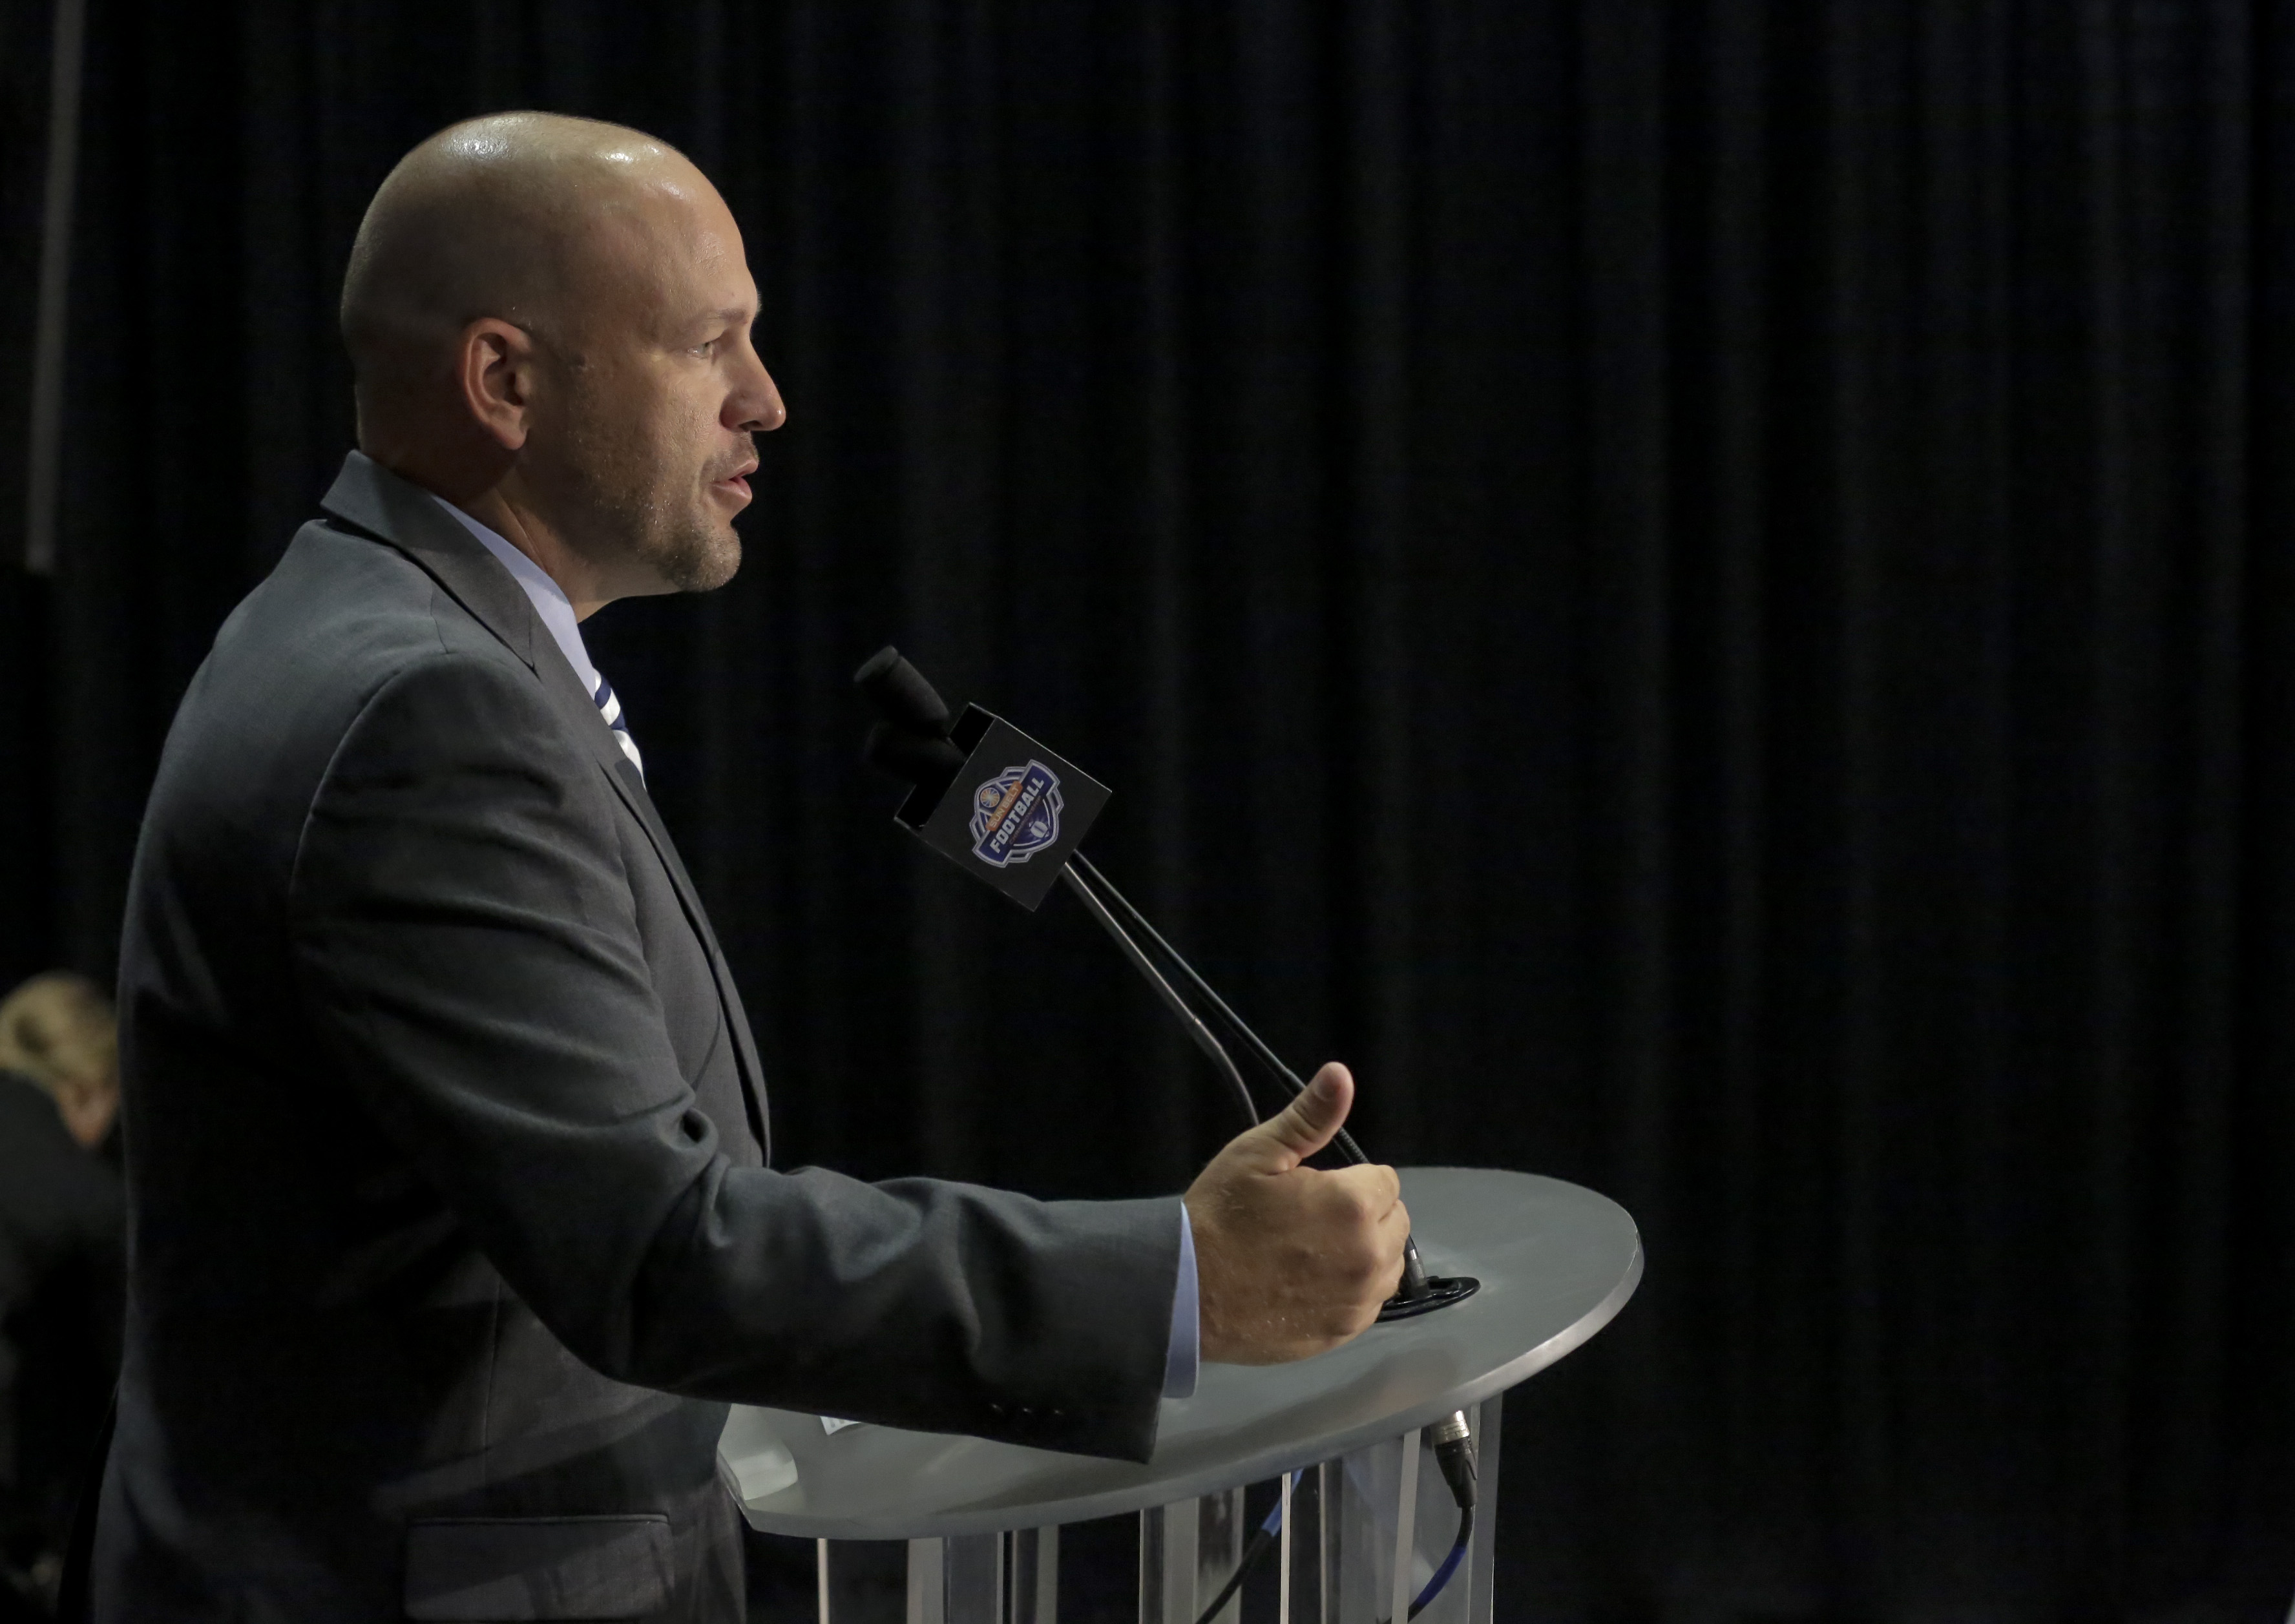 LISTEN: Chad Lunsford press conference for New Mexico St. game week (10/21/19)